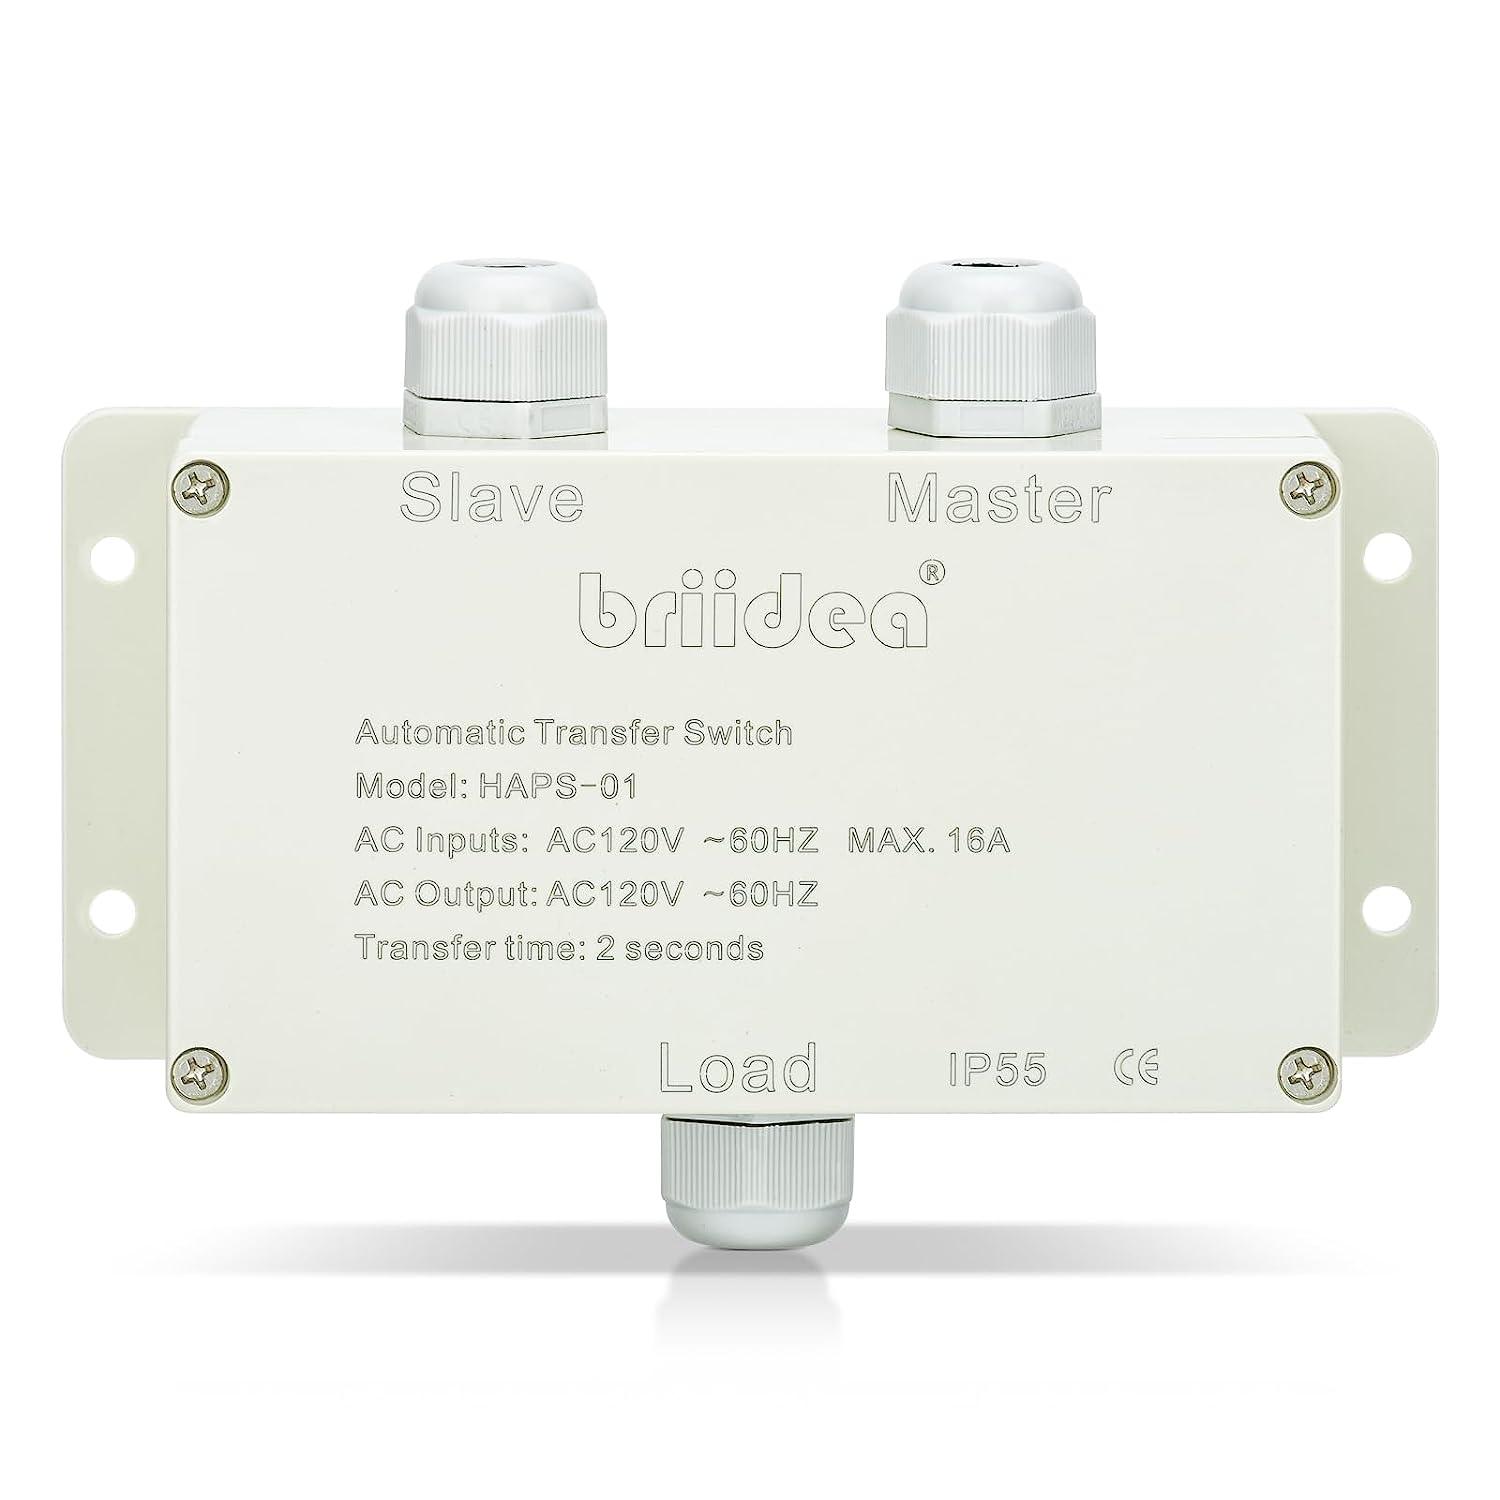 Automatic Transfer Switch, Briidea 120 VAC 16 AMP ATS Auto Transfer Switch for Inverter and Main Powers, UL Listed, Suitable for Use in Boats, RVs, Solar Power Systems, Motorhomes - briidea